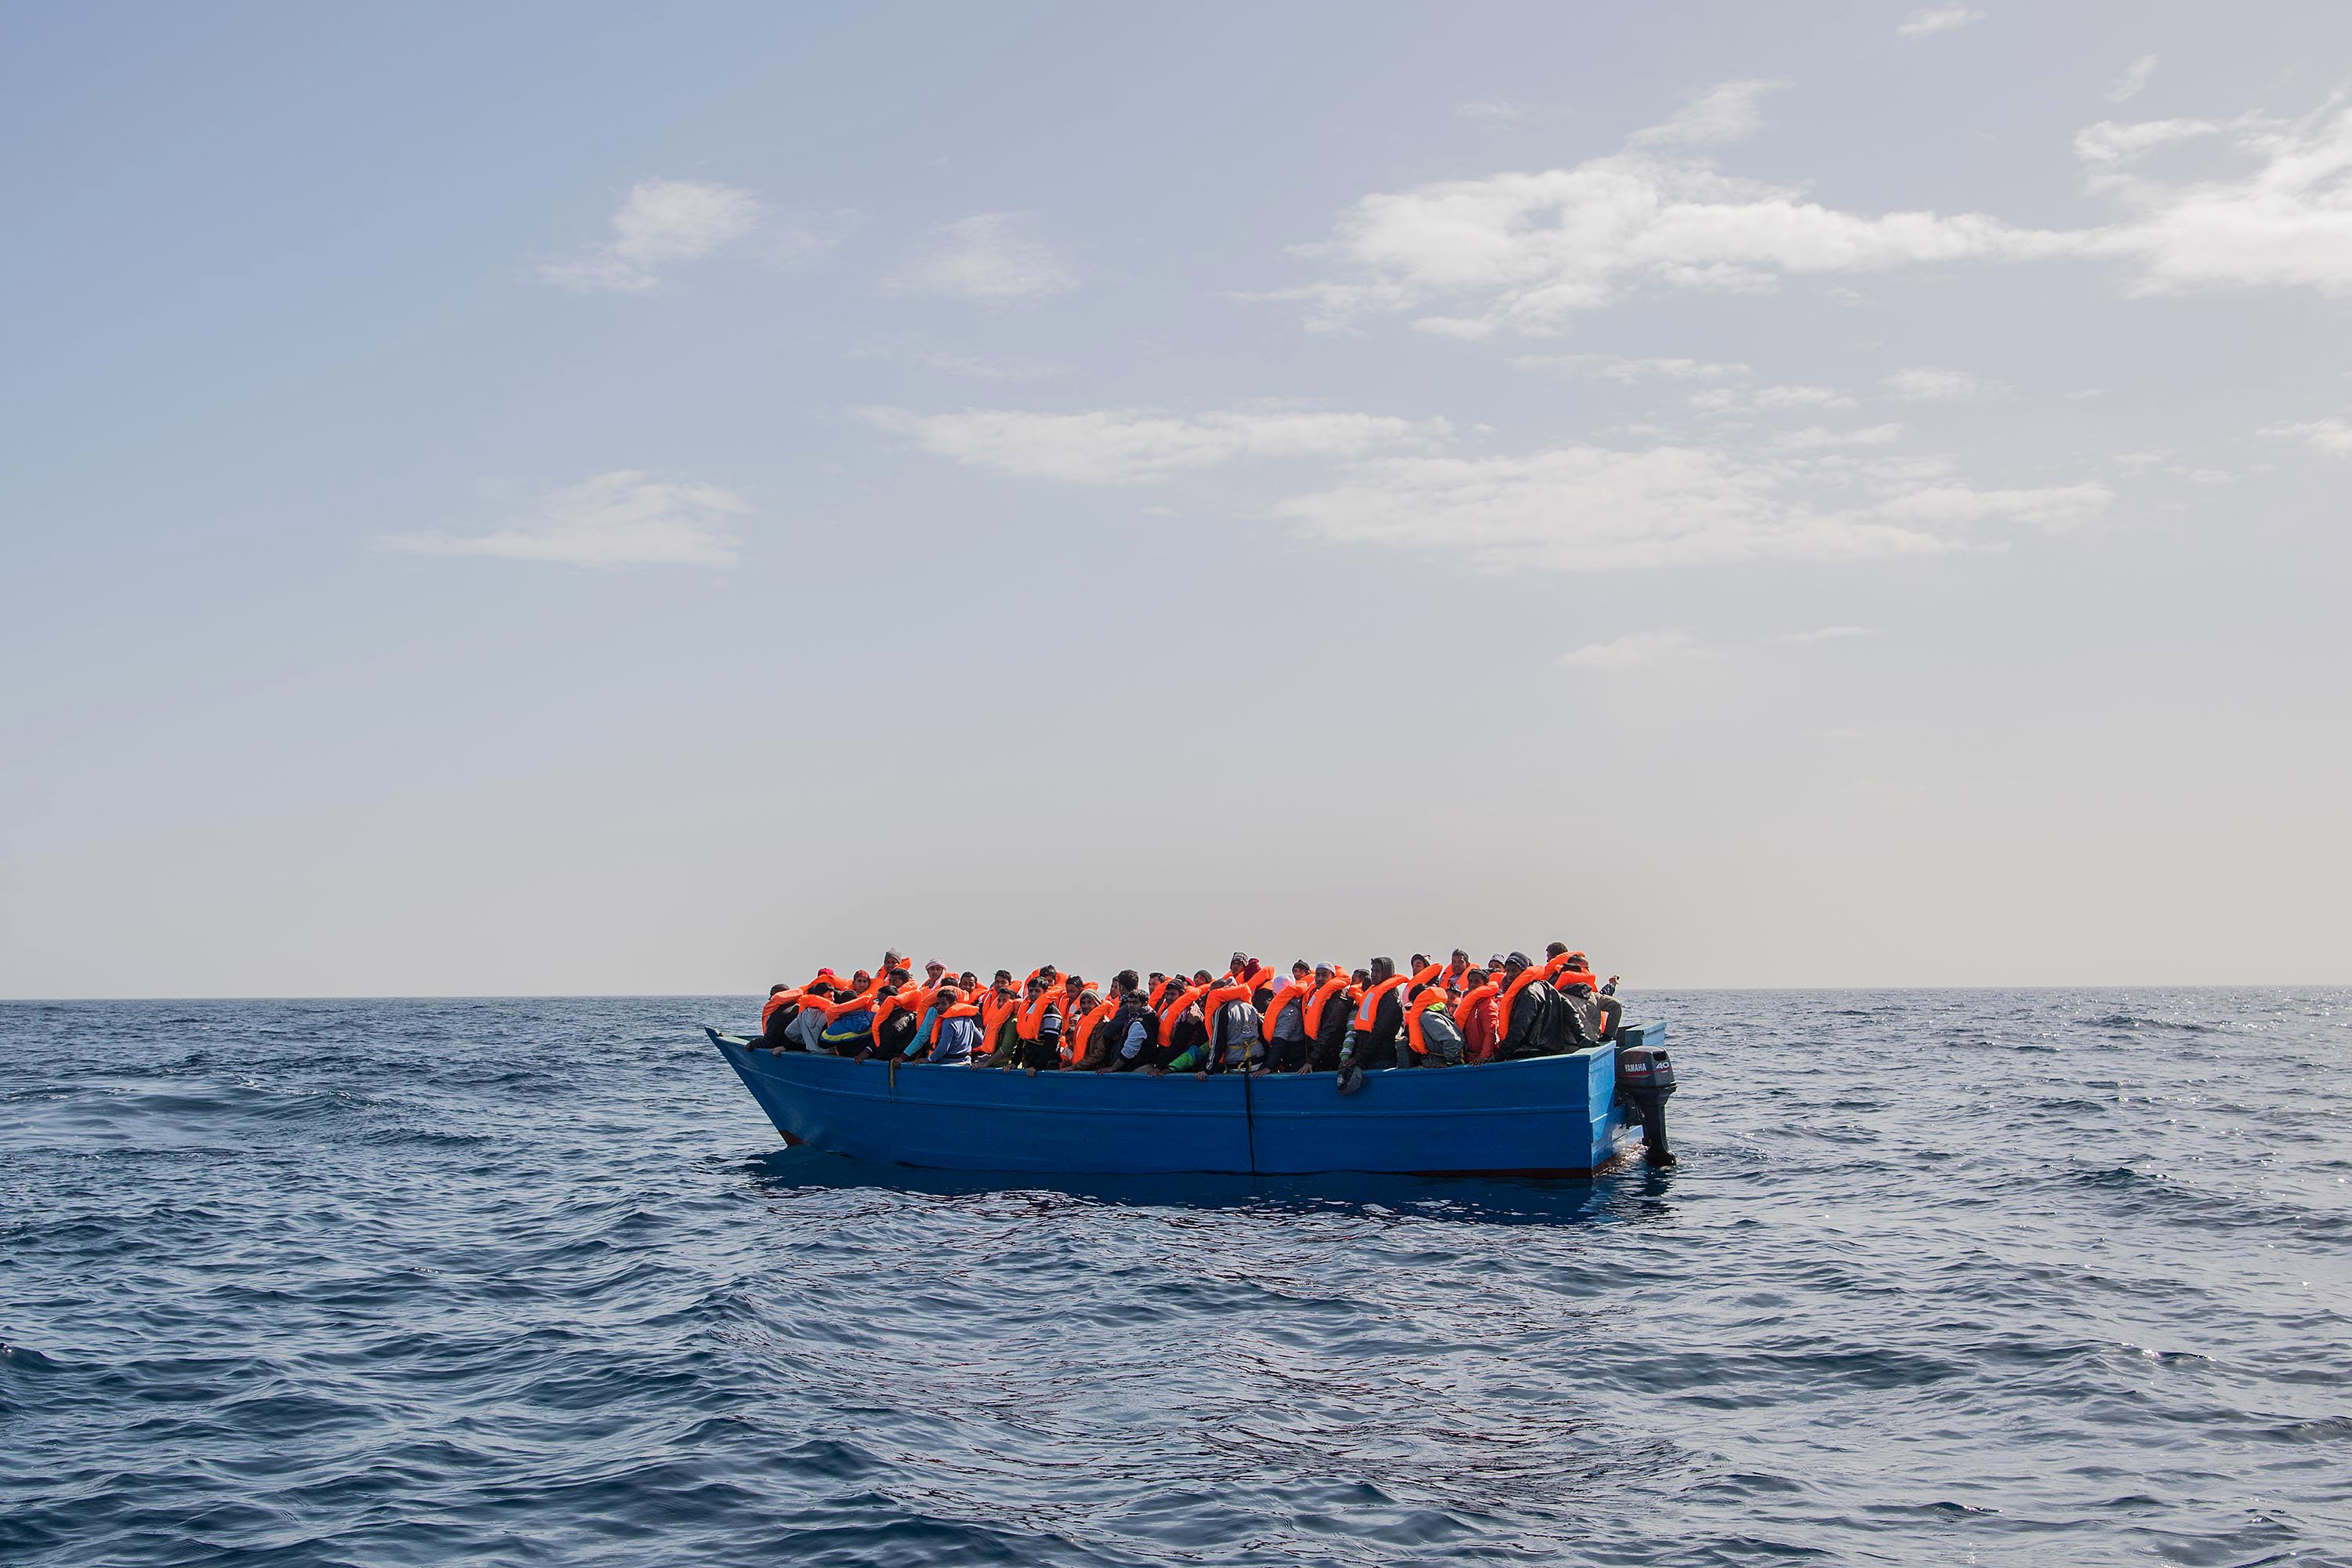 Migrants and refugees are assisted by the Spanish NGO Proactiva Open Arms 20 miles north of Sabratha, Libya on Feb. 18, 2017. (David Ramos—Getty Images)